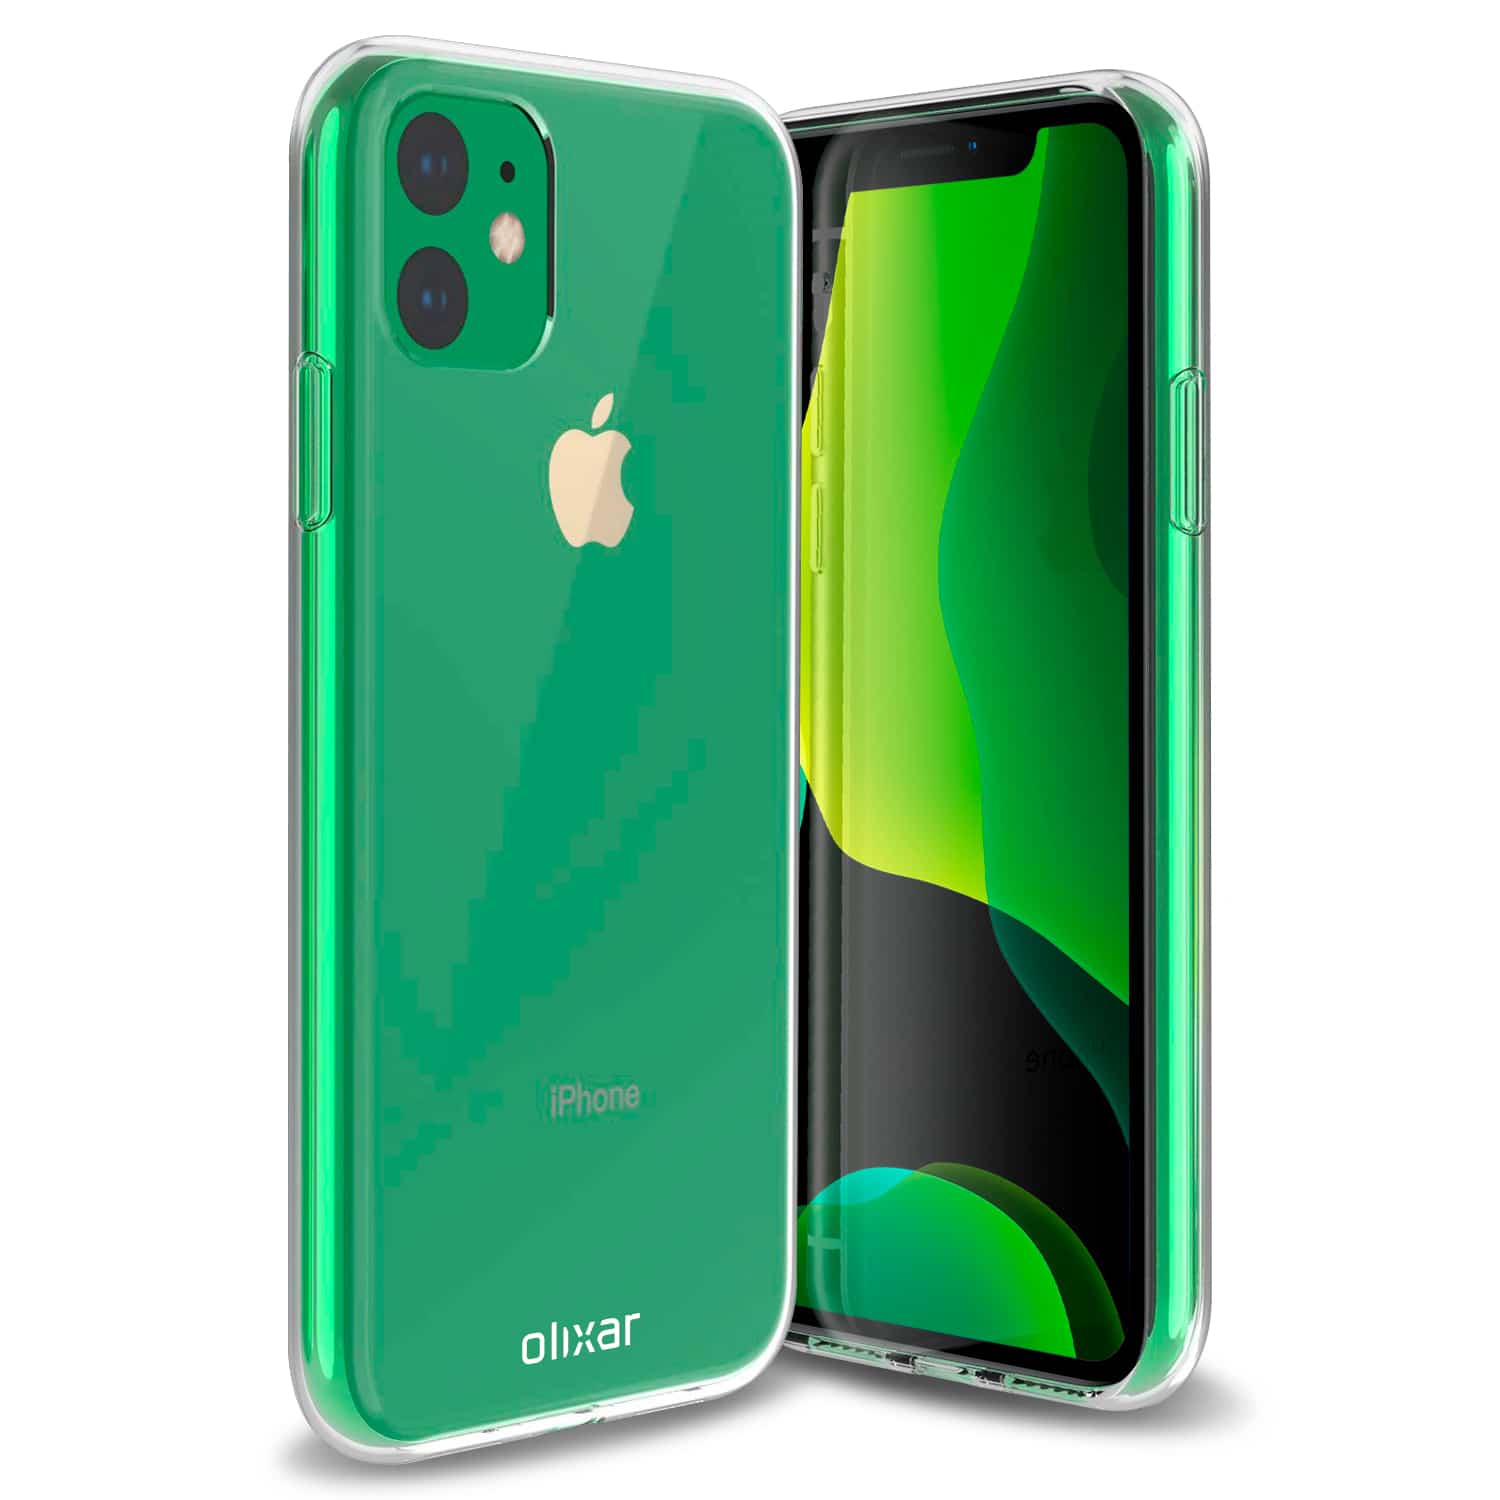 What iPhone 11 colors will we see? This green option looks a lot prettier than we anticipated